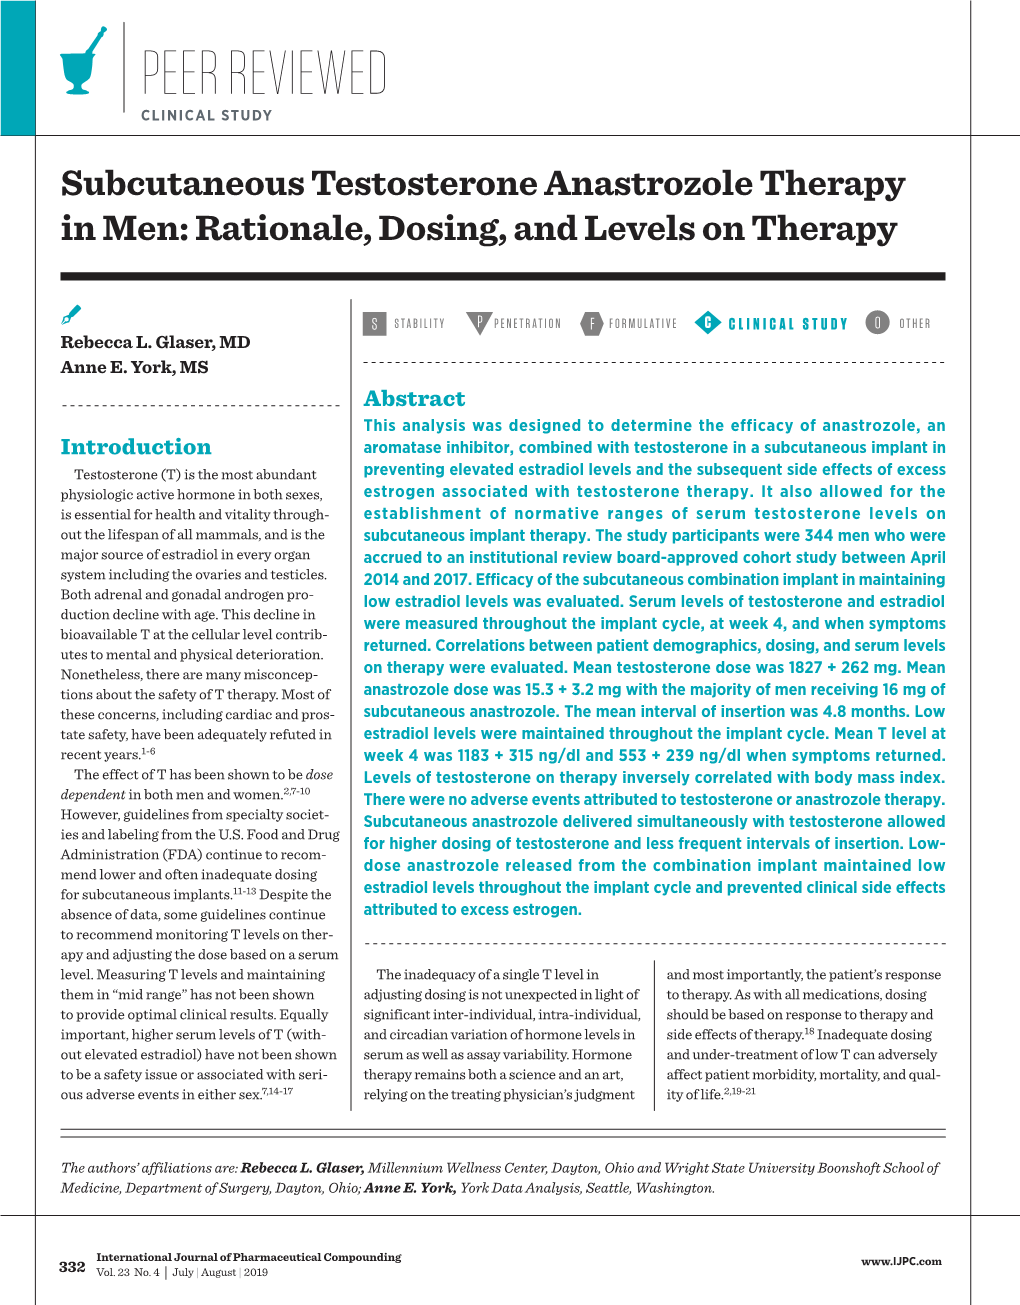 Subcutaneous Testosterone Anastrozole Therapy in Men-Rationale